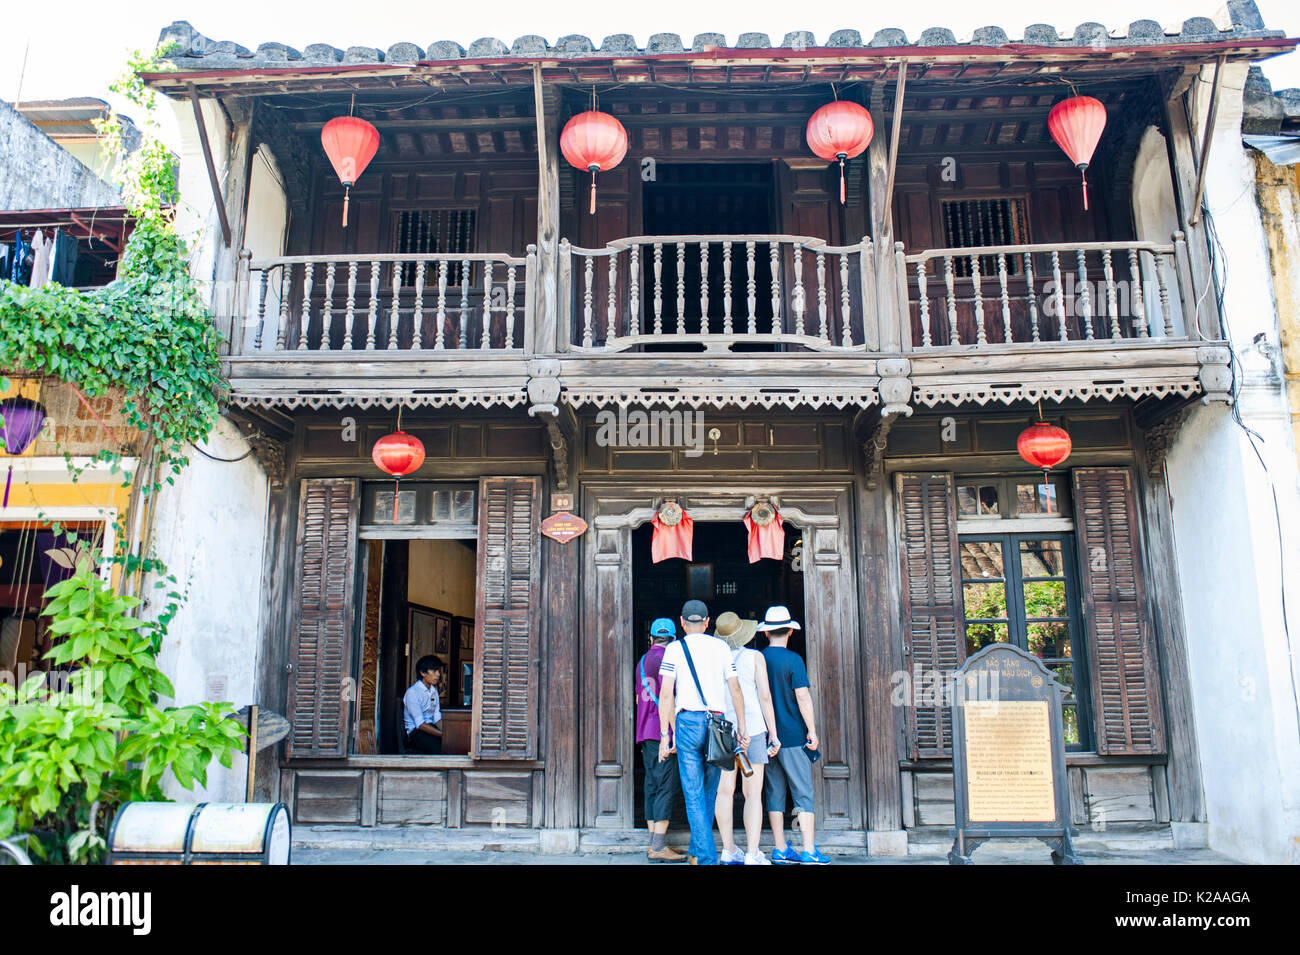 Museum of Trade Ceramics, Hoi An Ancient Town, Vietnam.  This house dates back to the late 19th Century. It was turned into the Museum of Trade Cerami Stock Photo